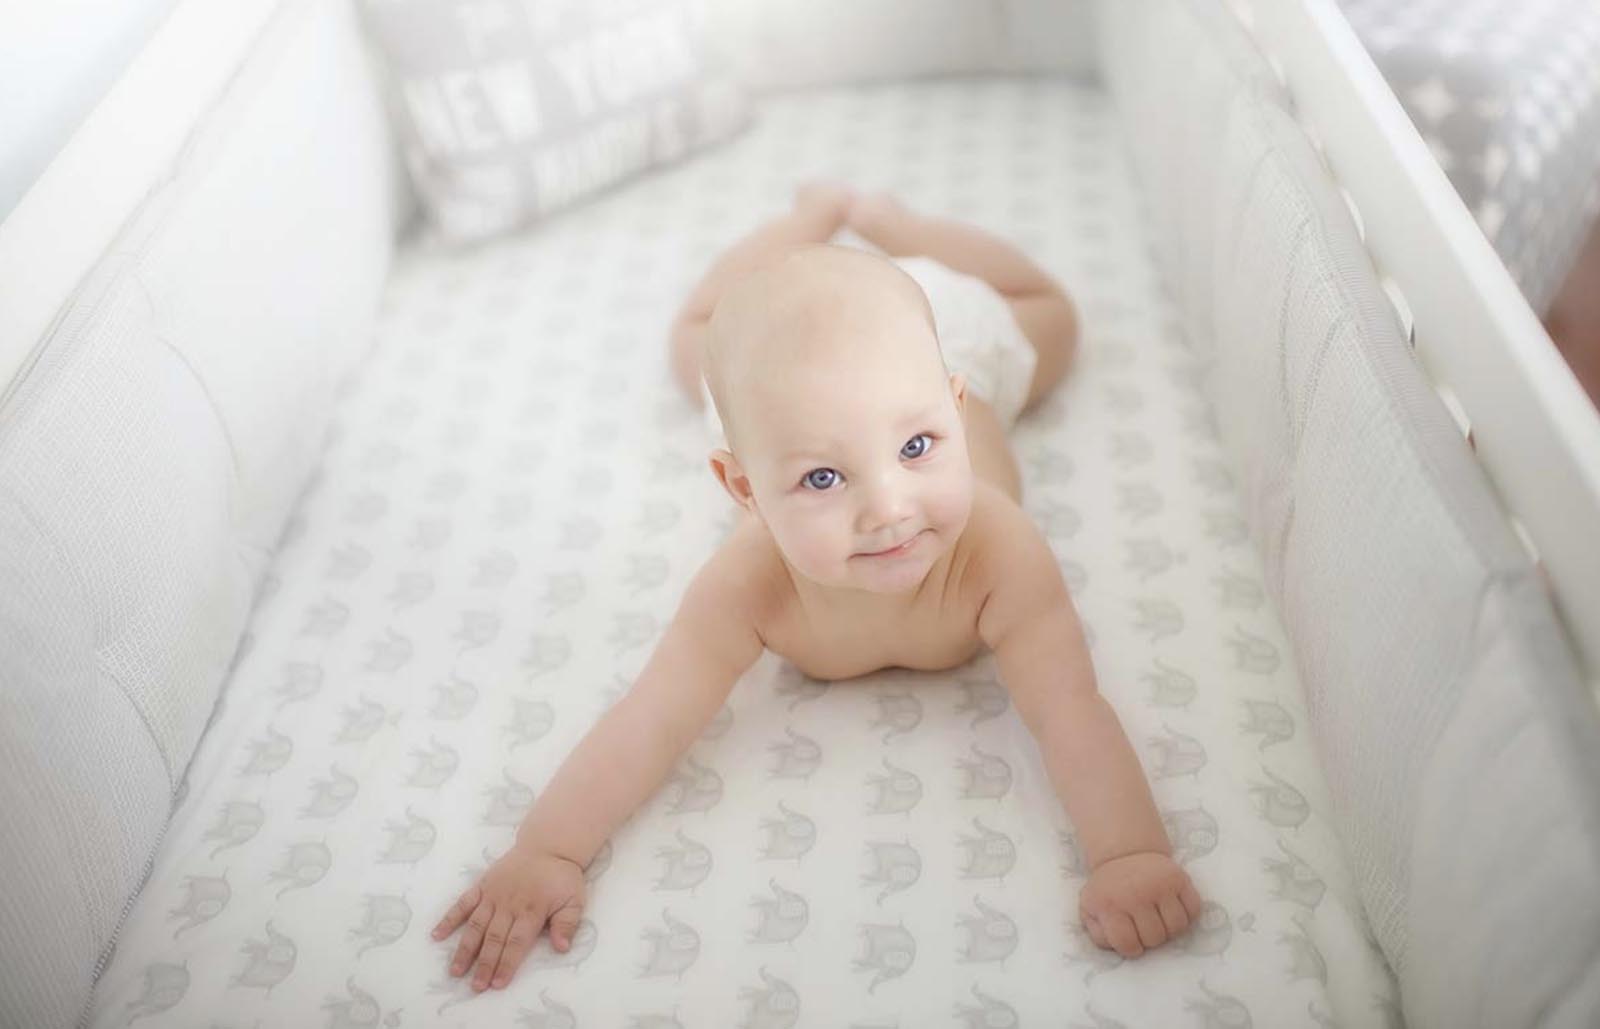 Today's Trends in baby photography- Belly time in a crib